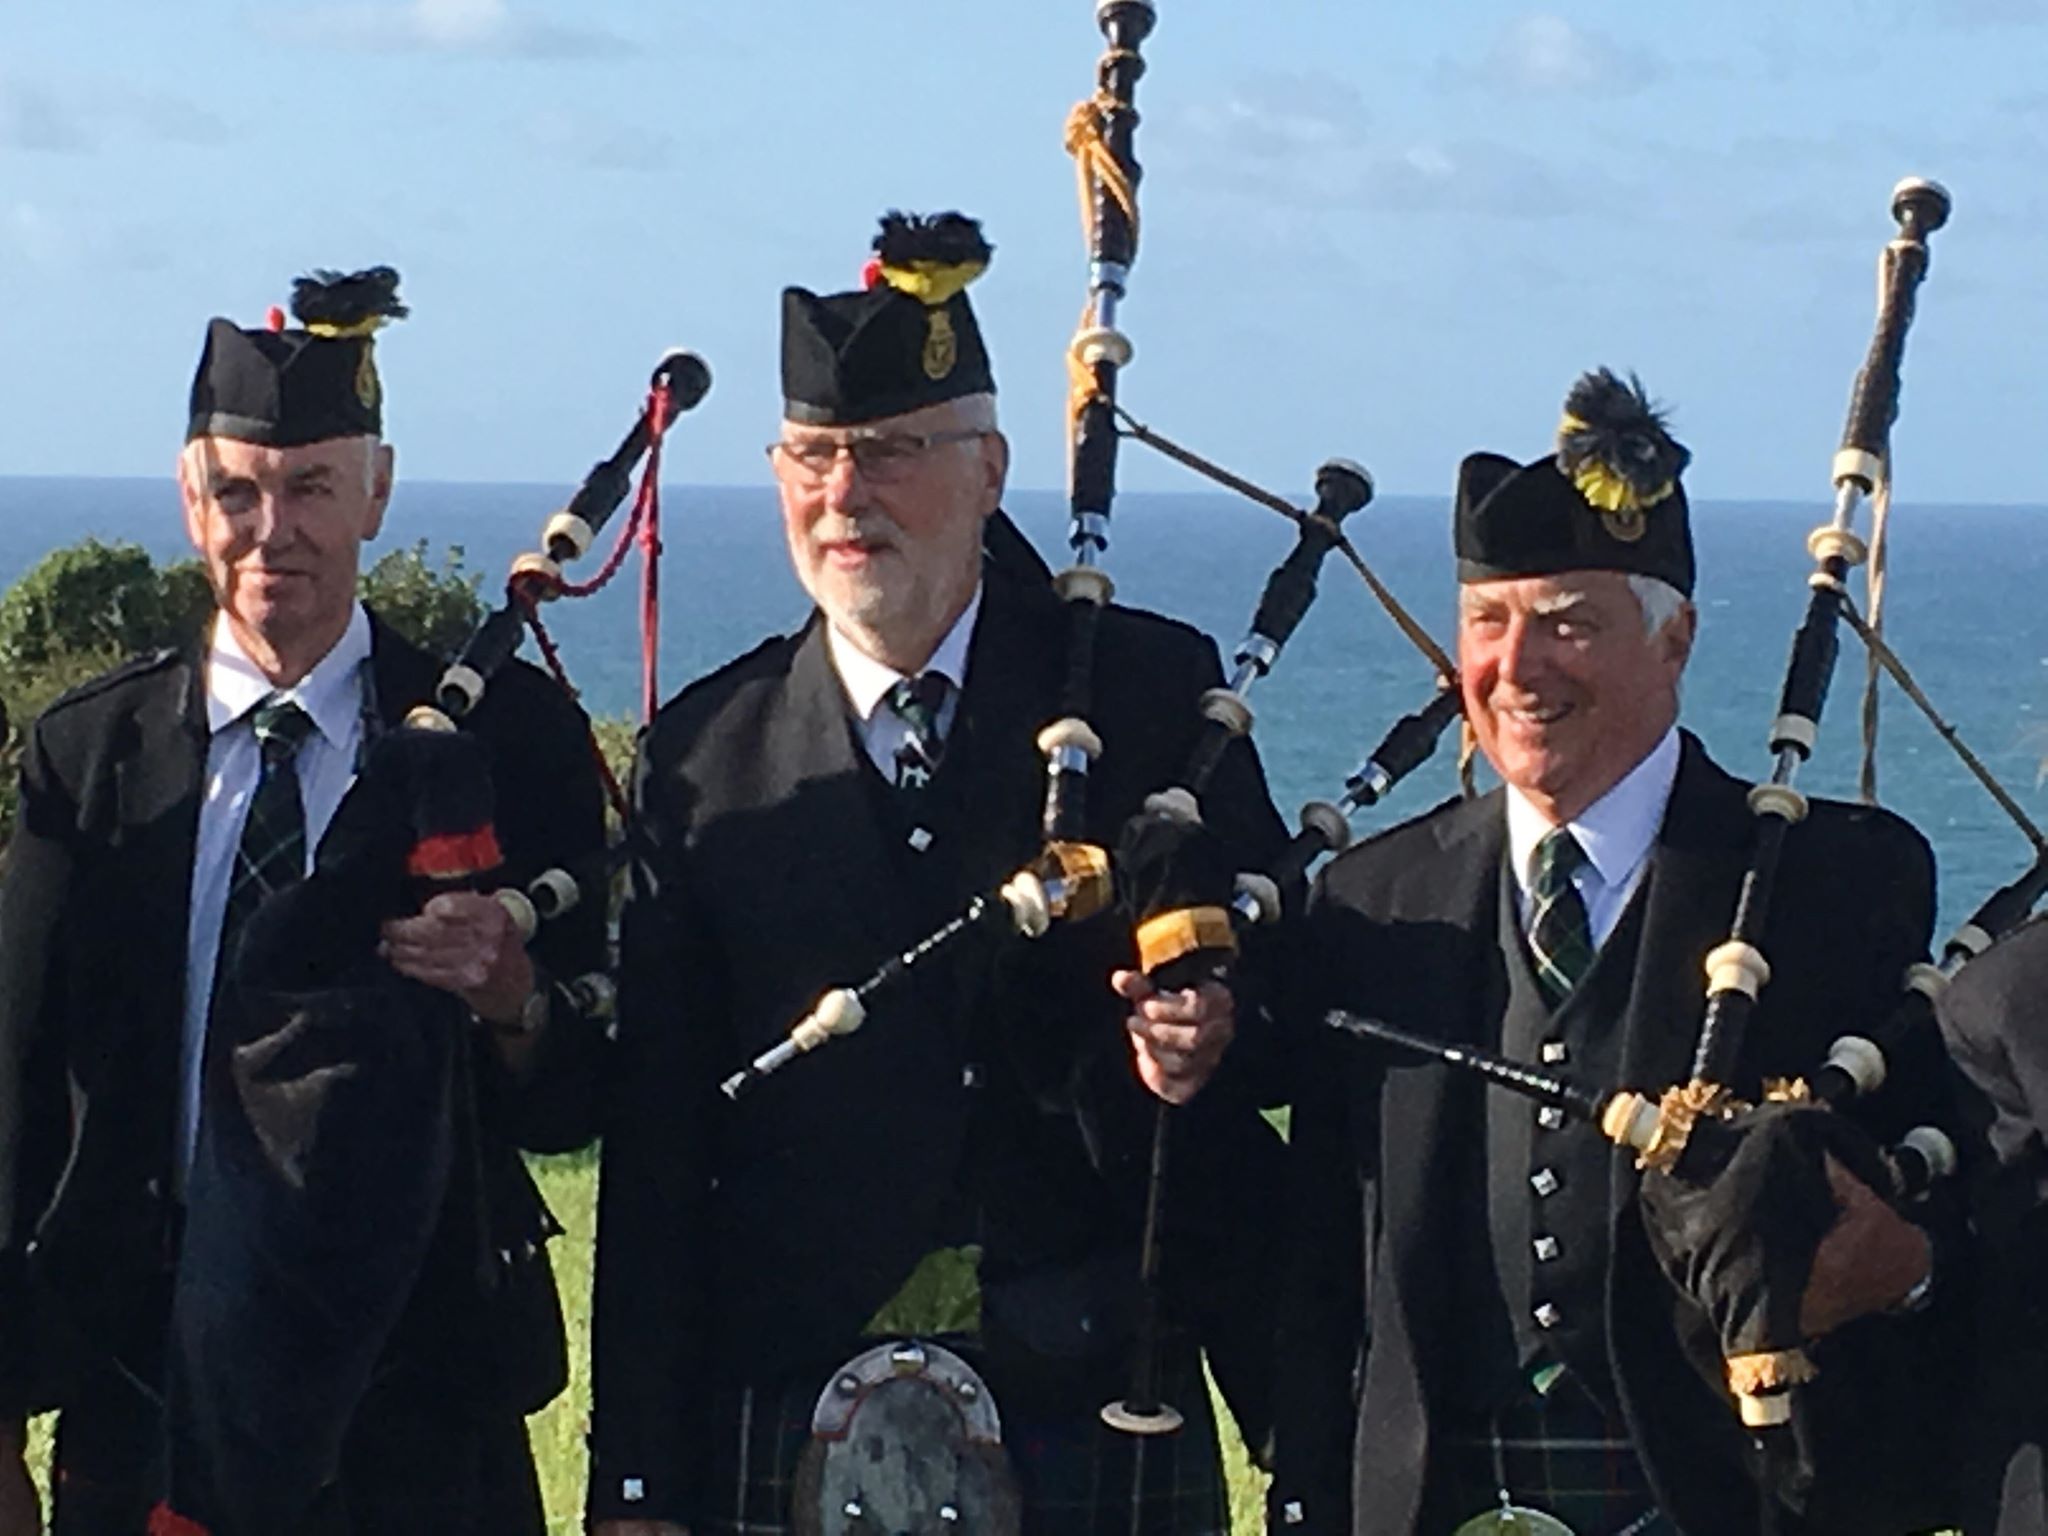 Alex, Matt C and John of Kernow Pipes and Drums at Port Isaac carnival 2019